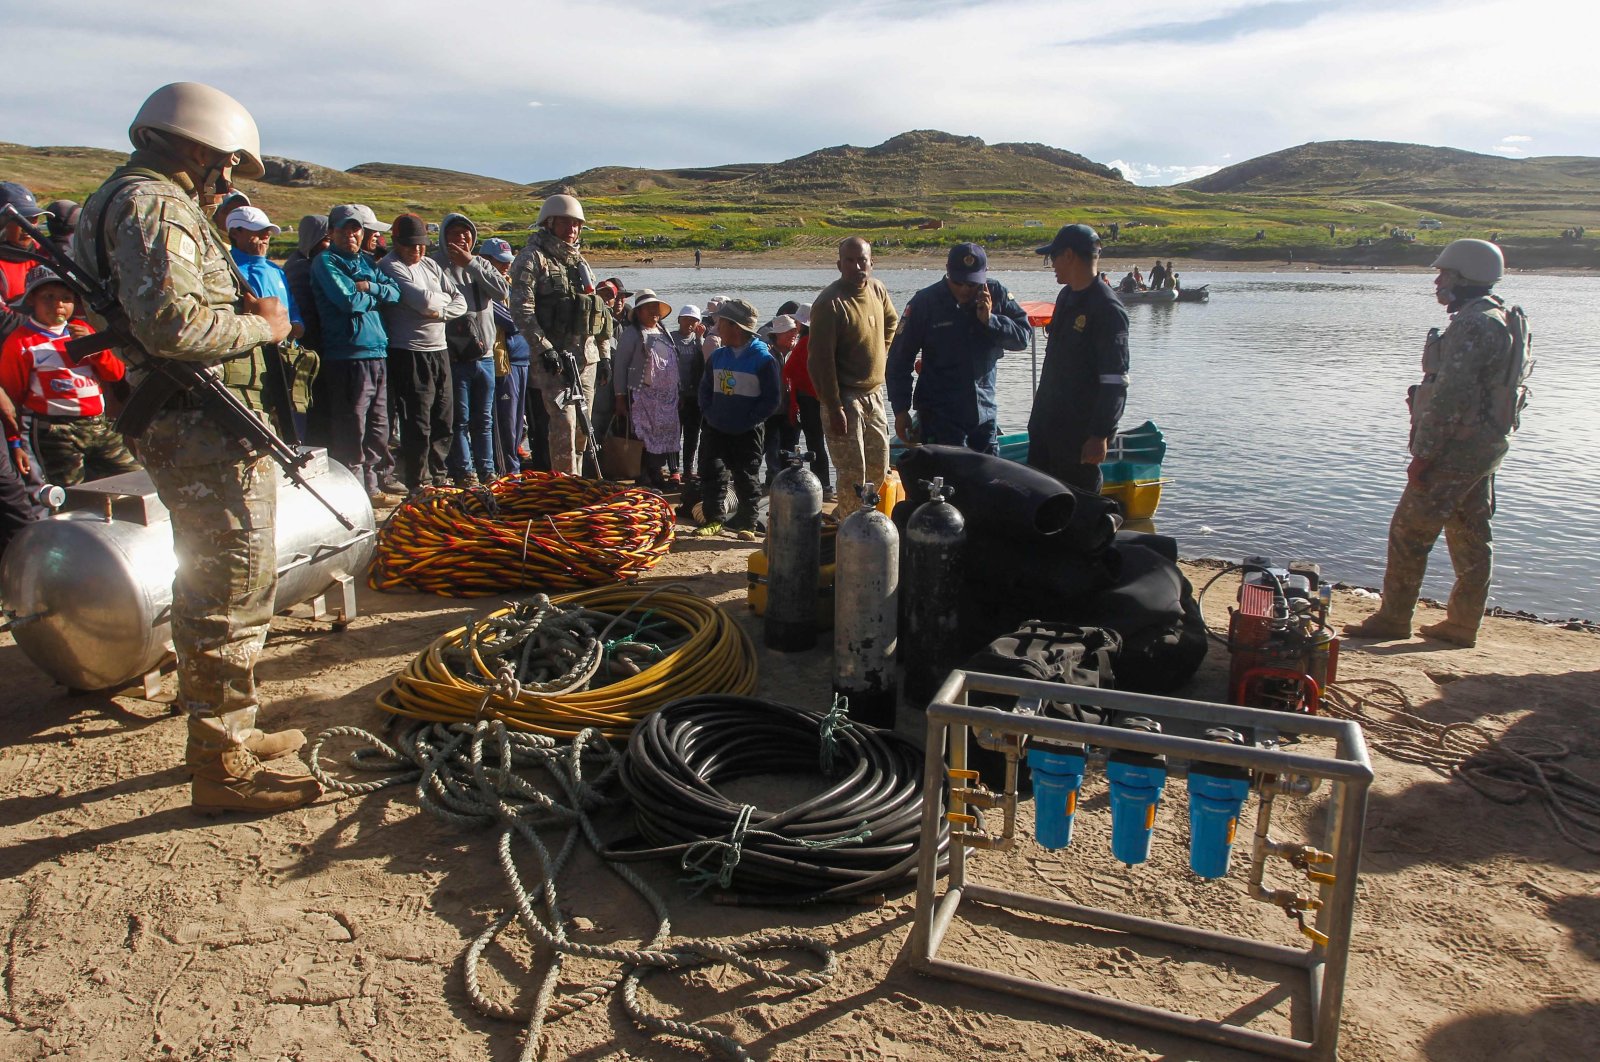 People gather at the site where rescue teams attempted to recover the bodies of five Peruvian soldiers that drowned in the river Ilave, Ilave, Peru, March 6, 2023. (AFP Photo)